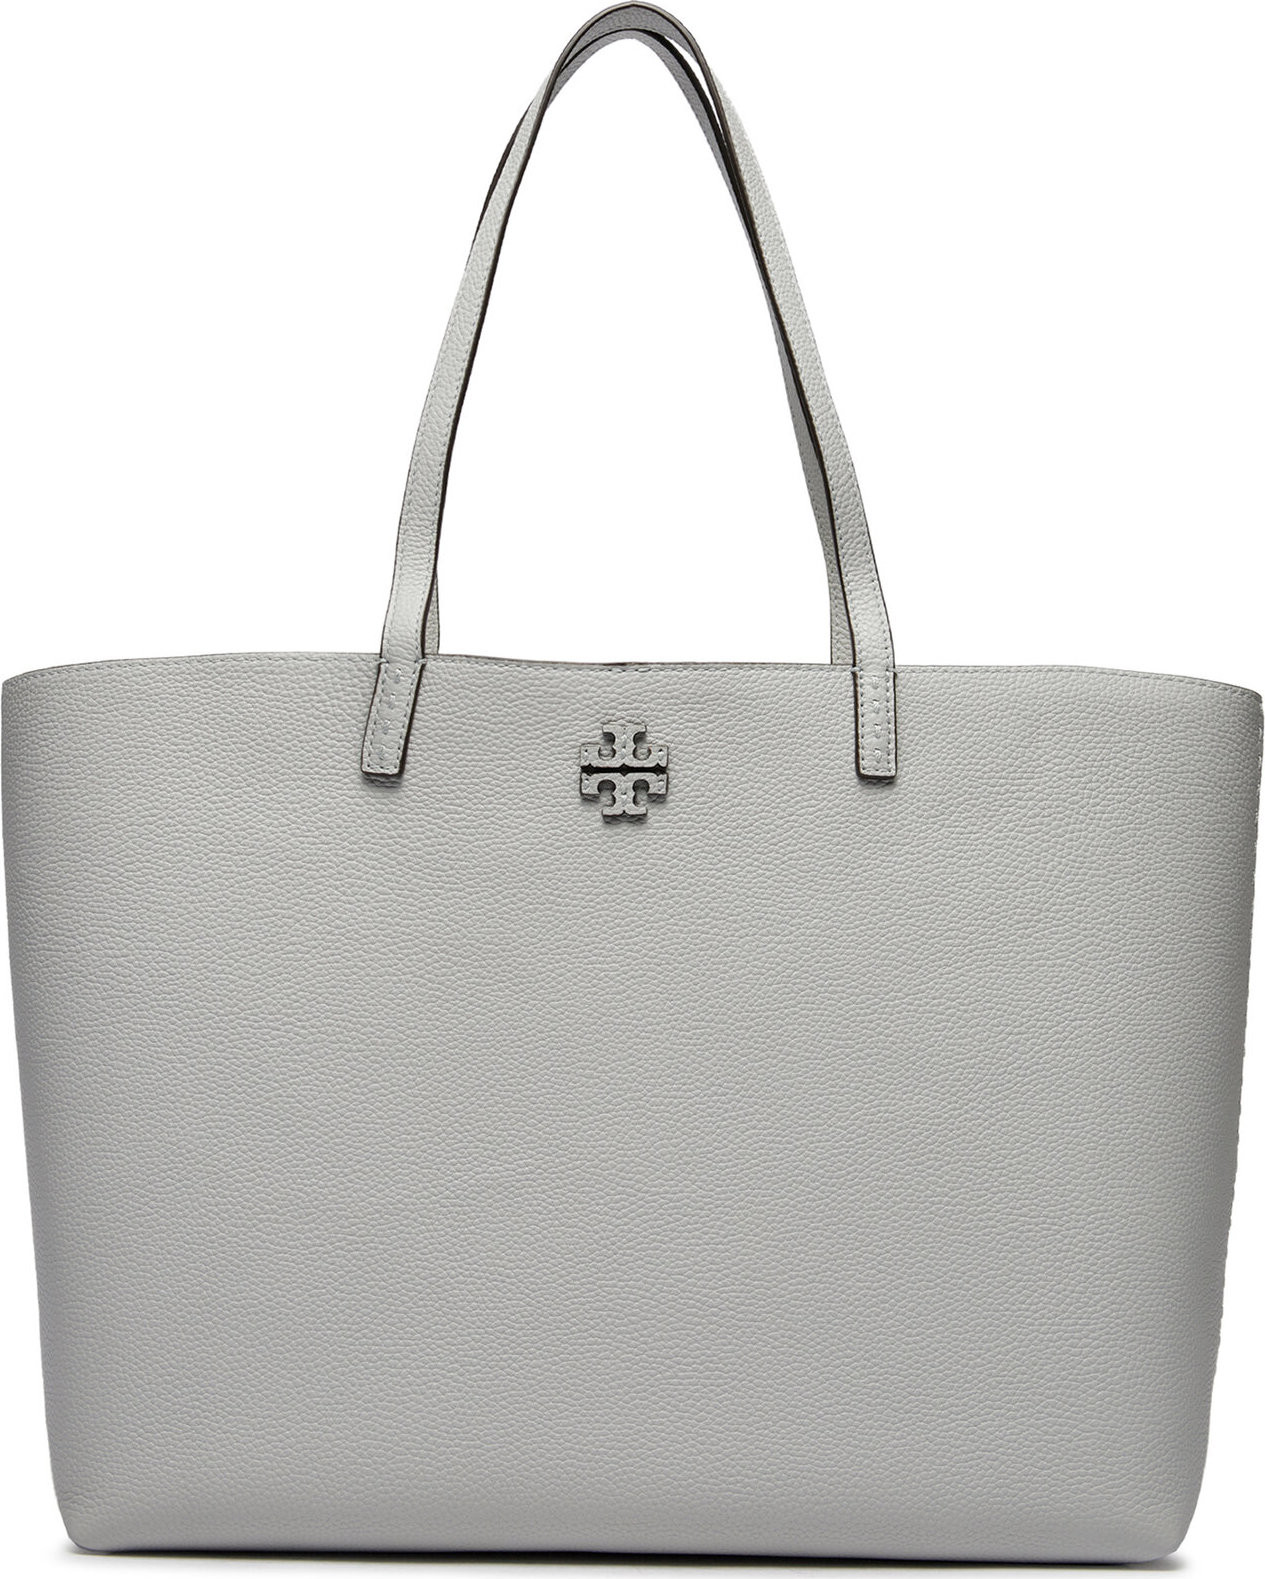 Kabelka Tory Burch 152221 Feather Gray 021